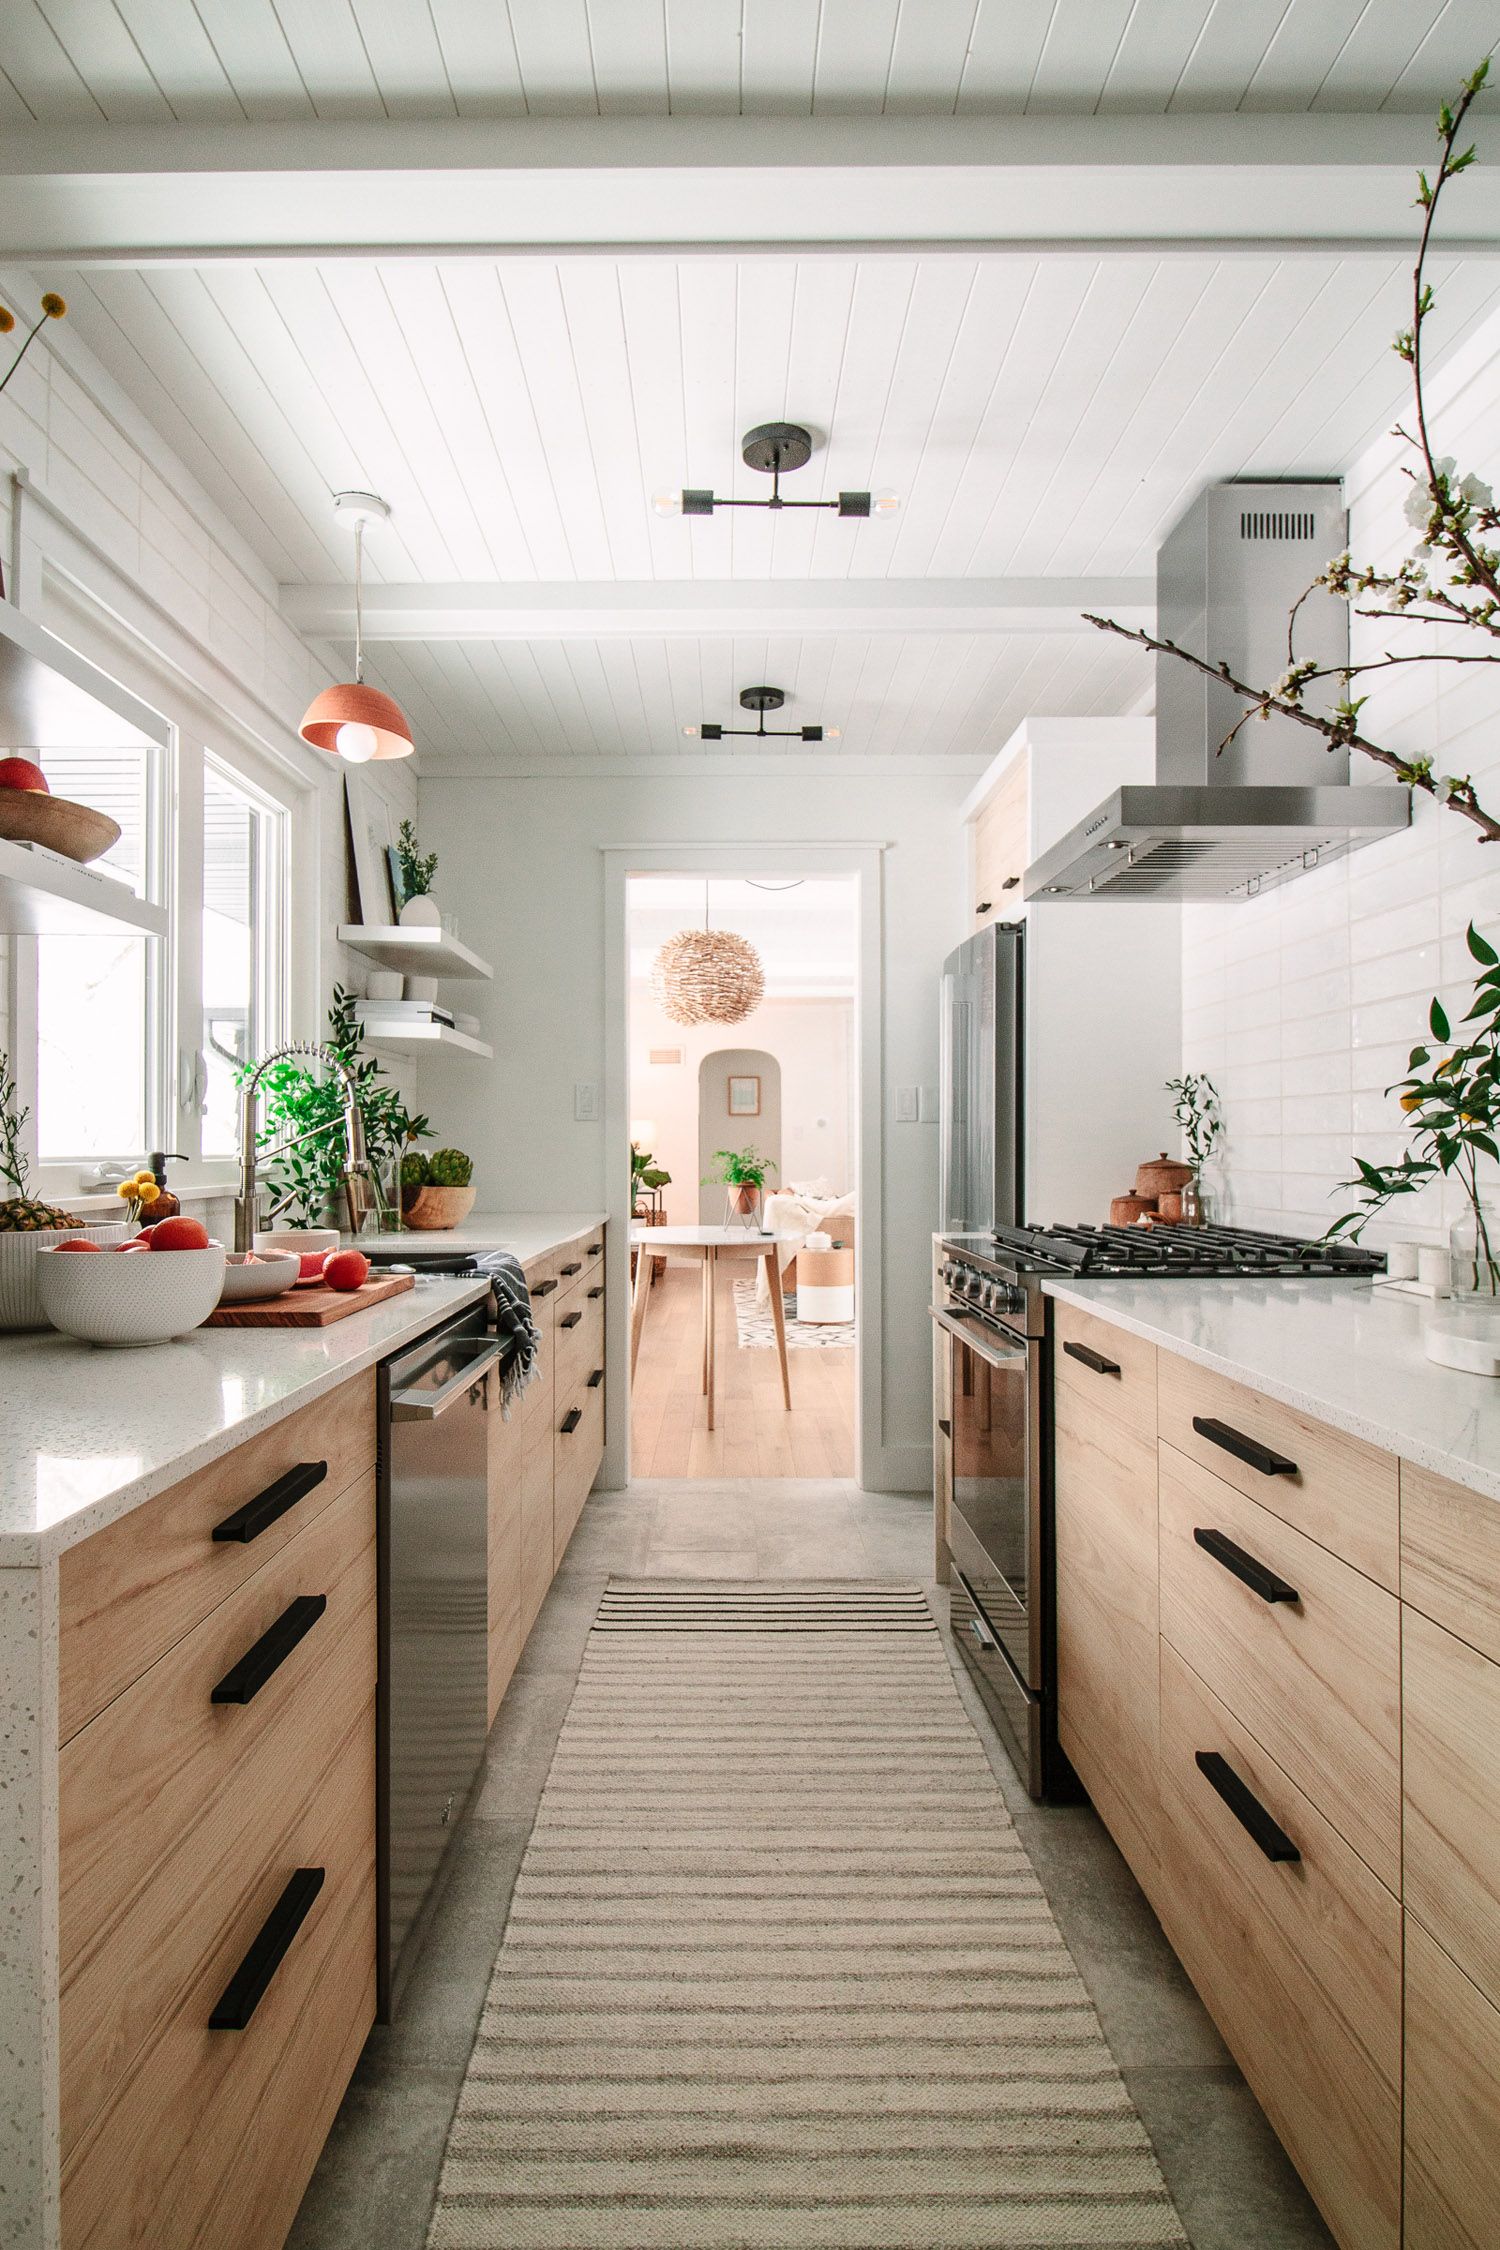 Small Galley Kitchen Ideas Photos Small Galley Kitchen Ideas Pictures And Tips From Hgtv